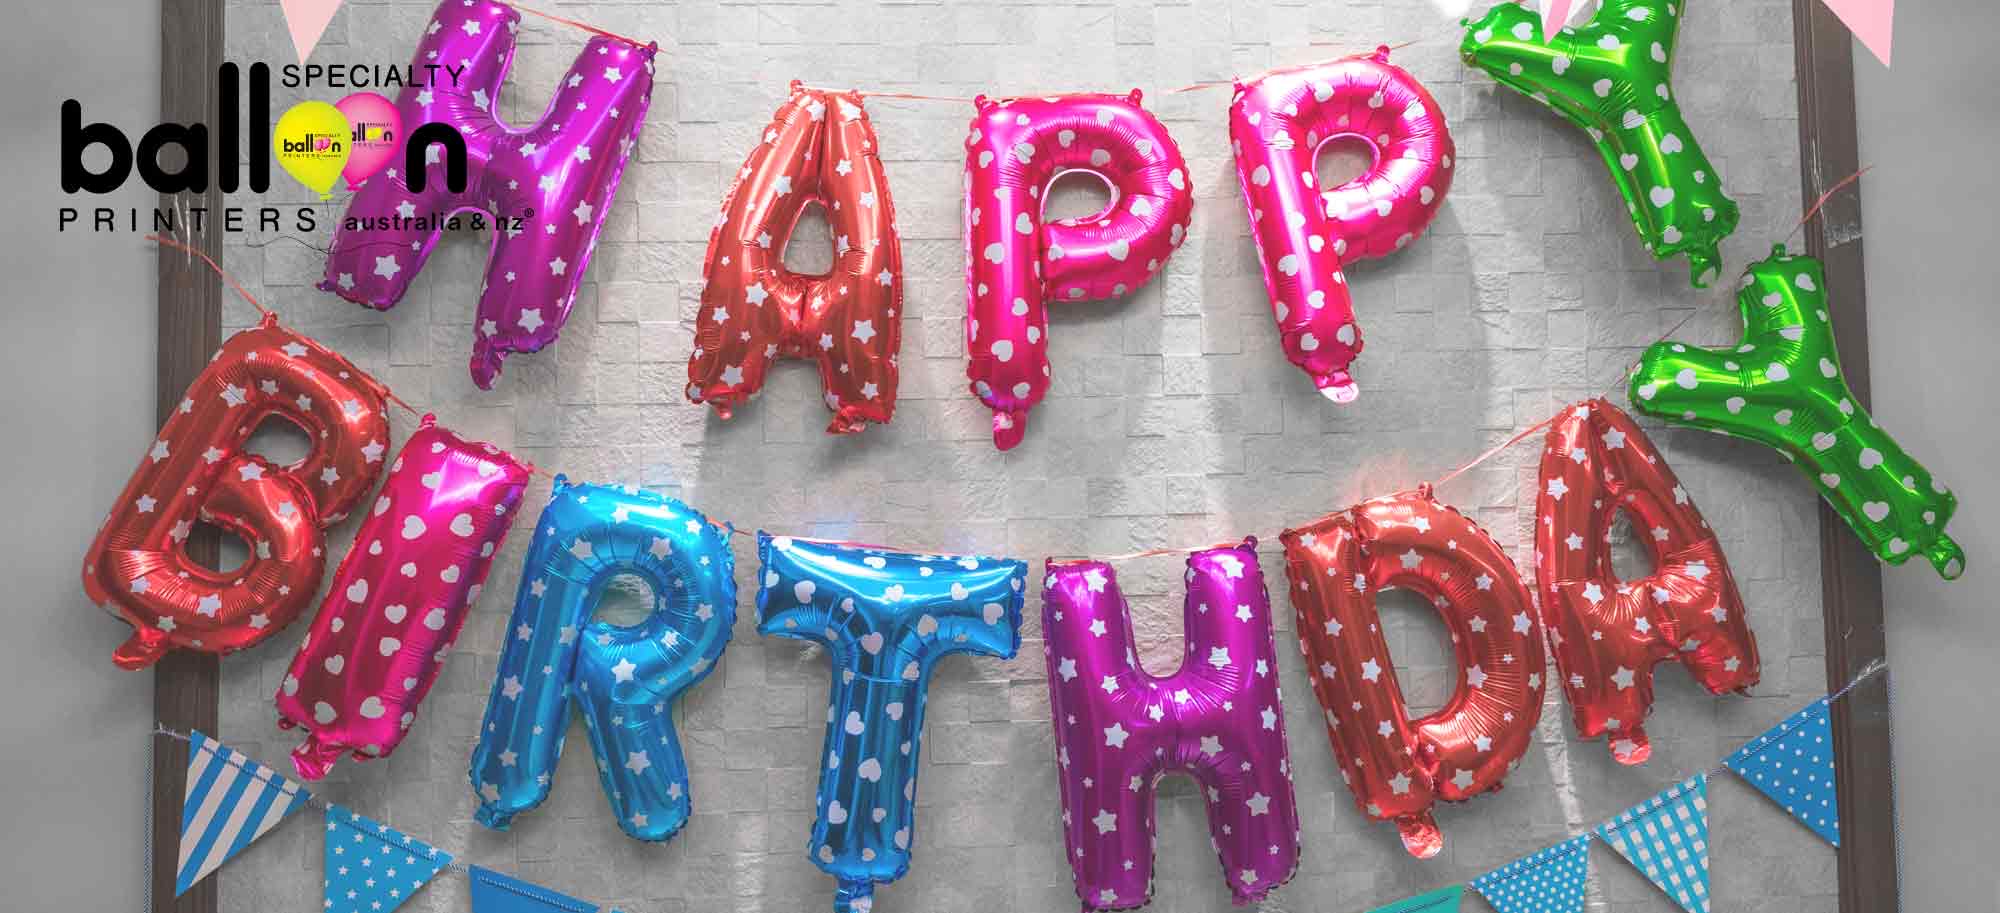 Specialty Balloon Printers 7 Clever Uses For Personalised Balloons